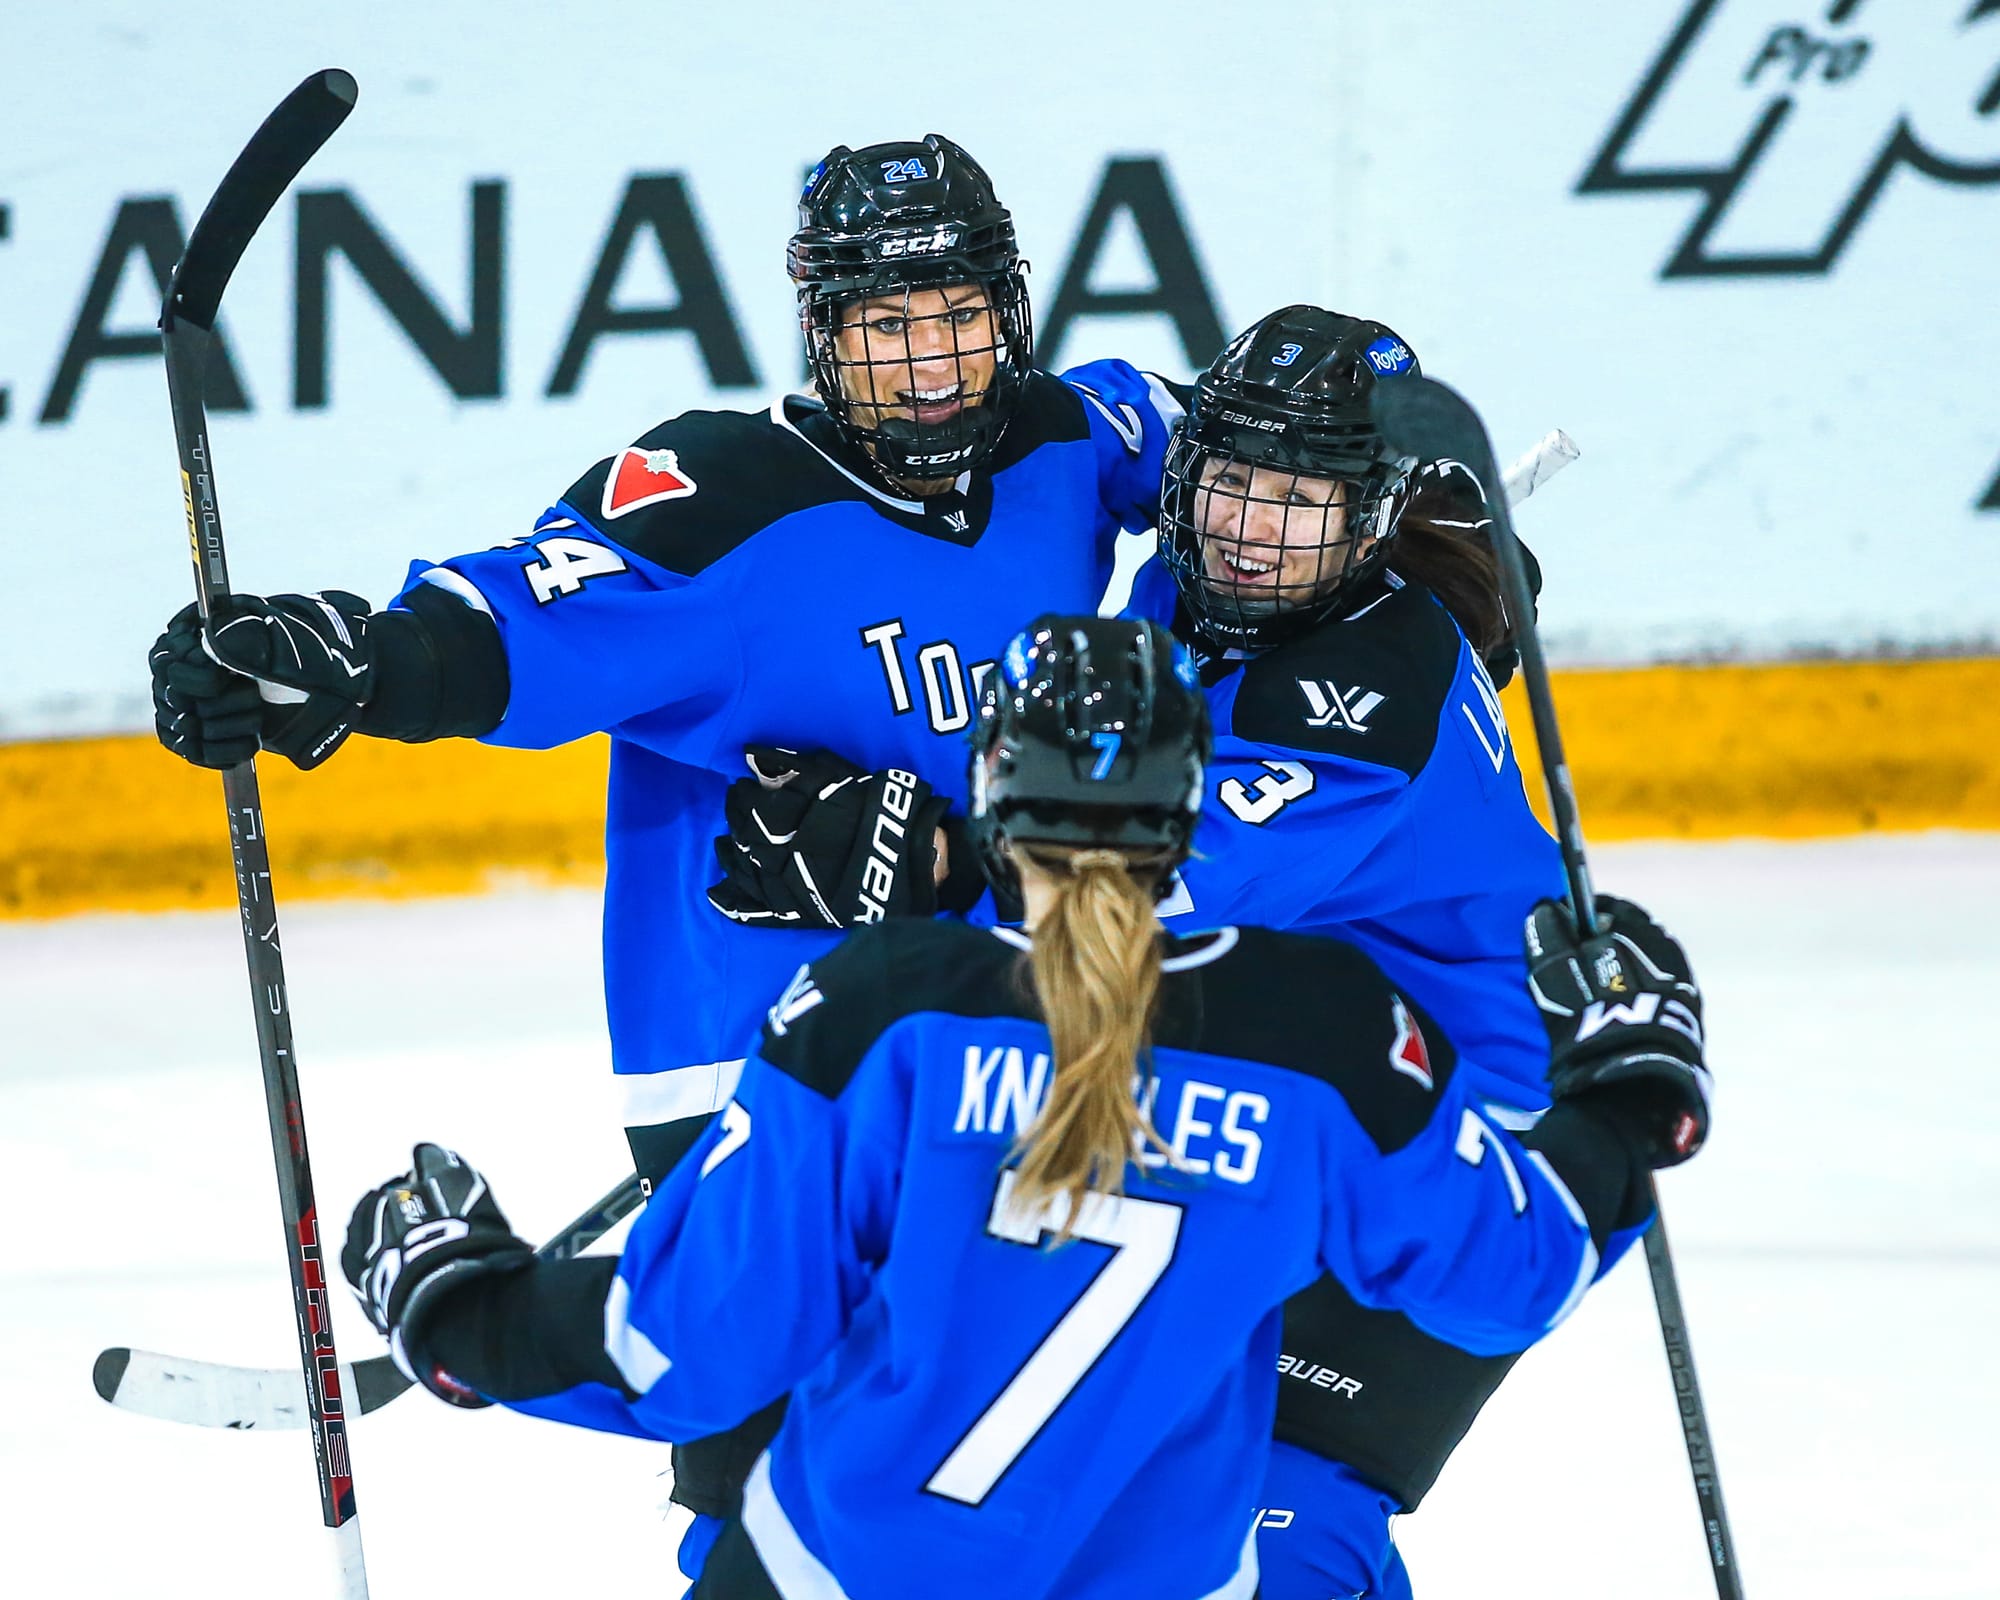 Natalie Spooner, Jocelyne Larocque, and Olivia Knowles celebrate a goal. They are in a group hug and all wearing blue home jerseys.